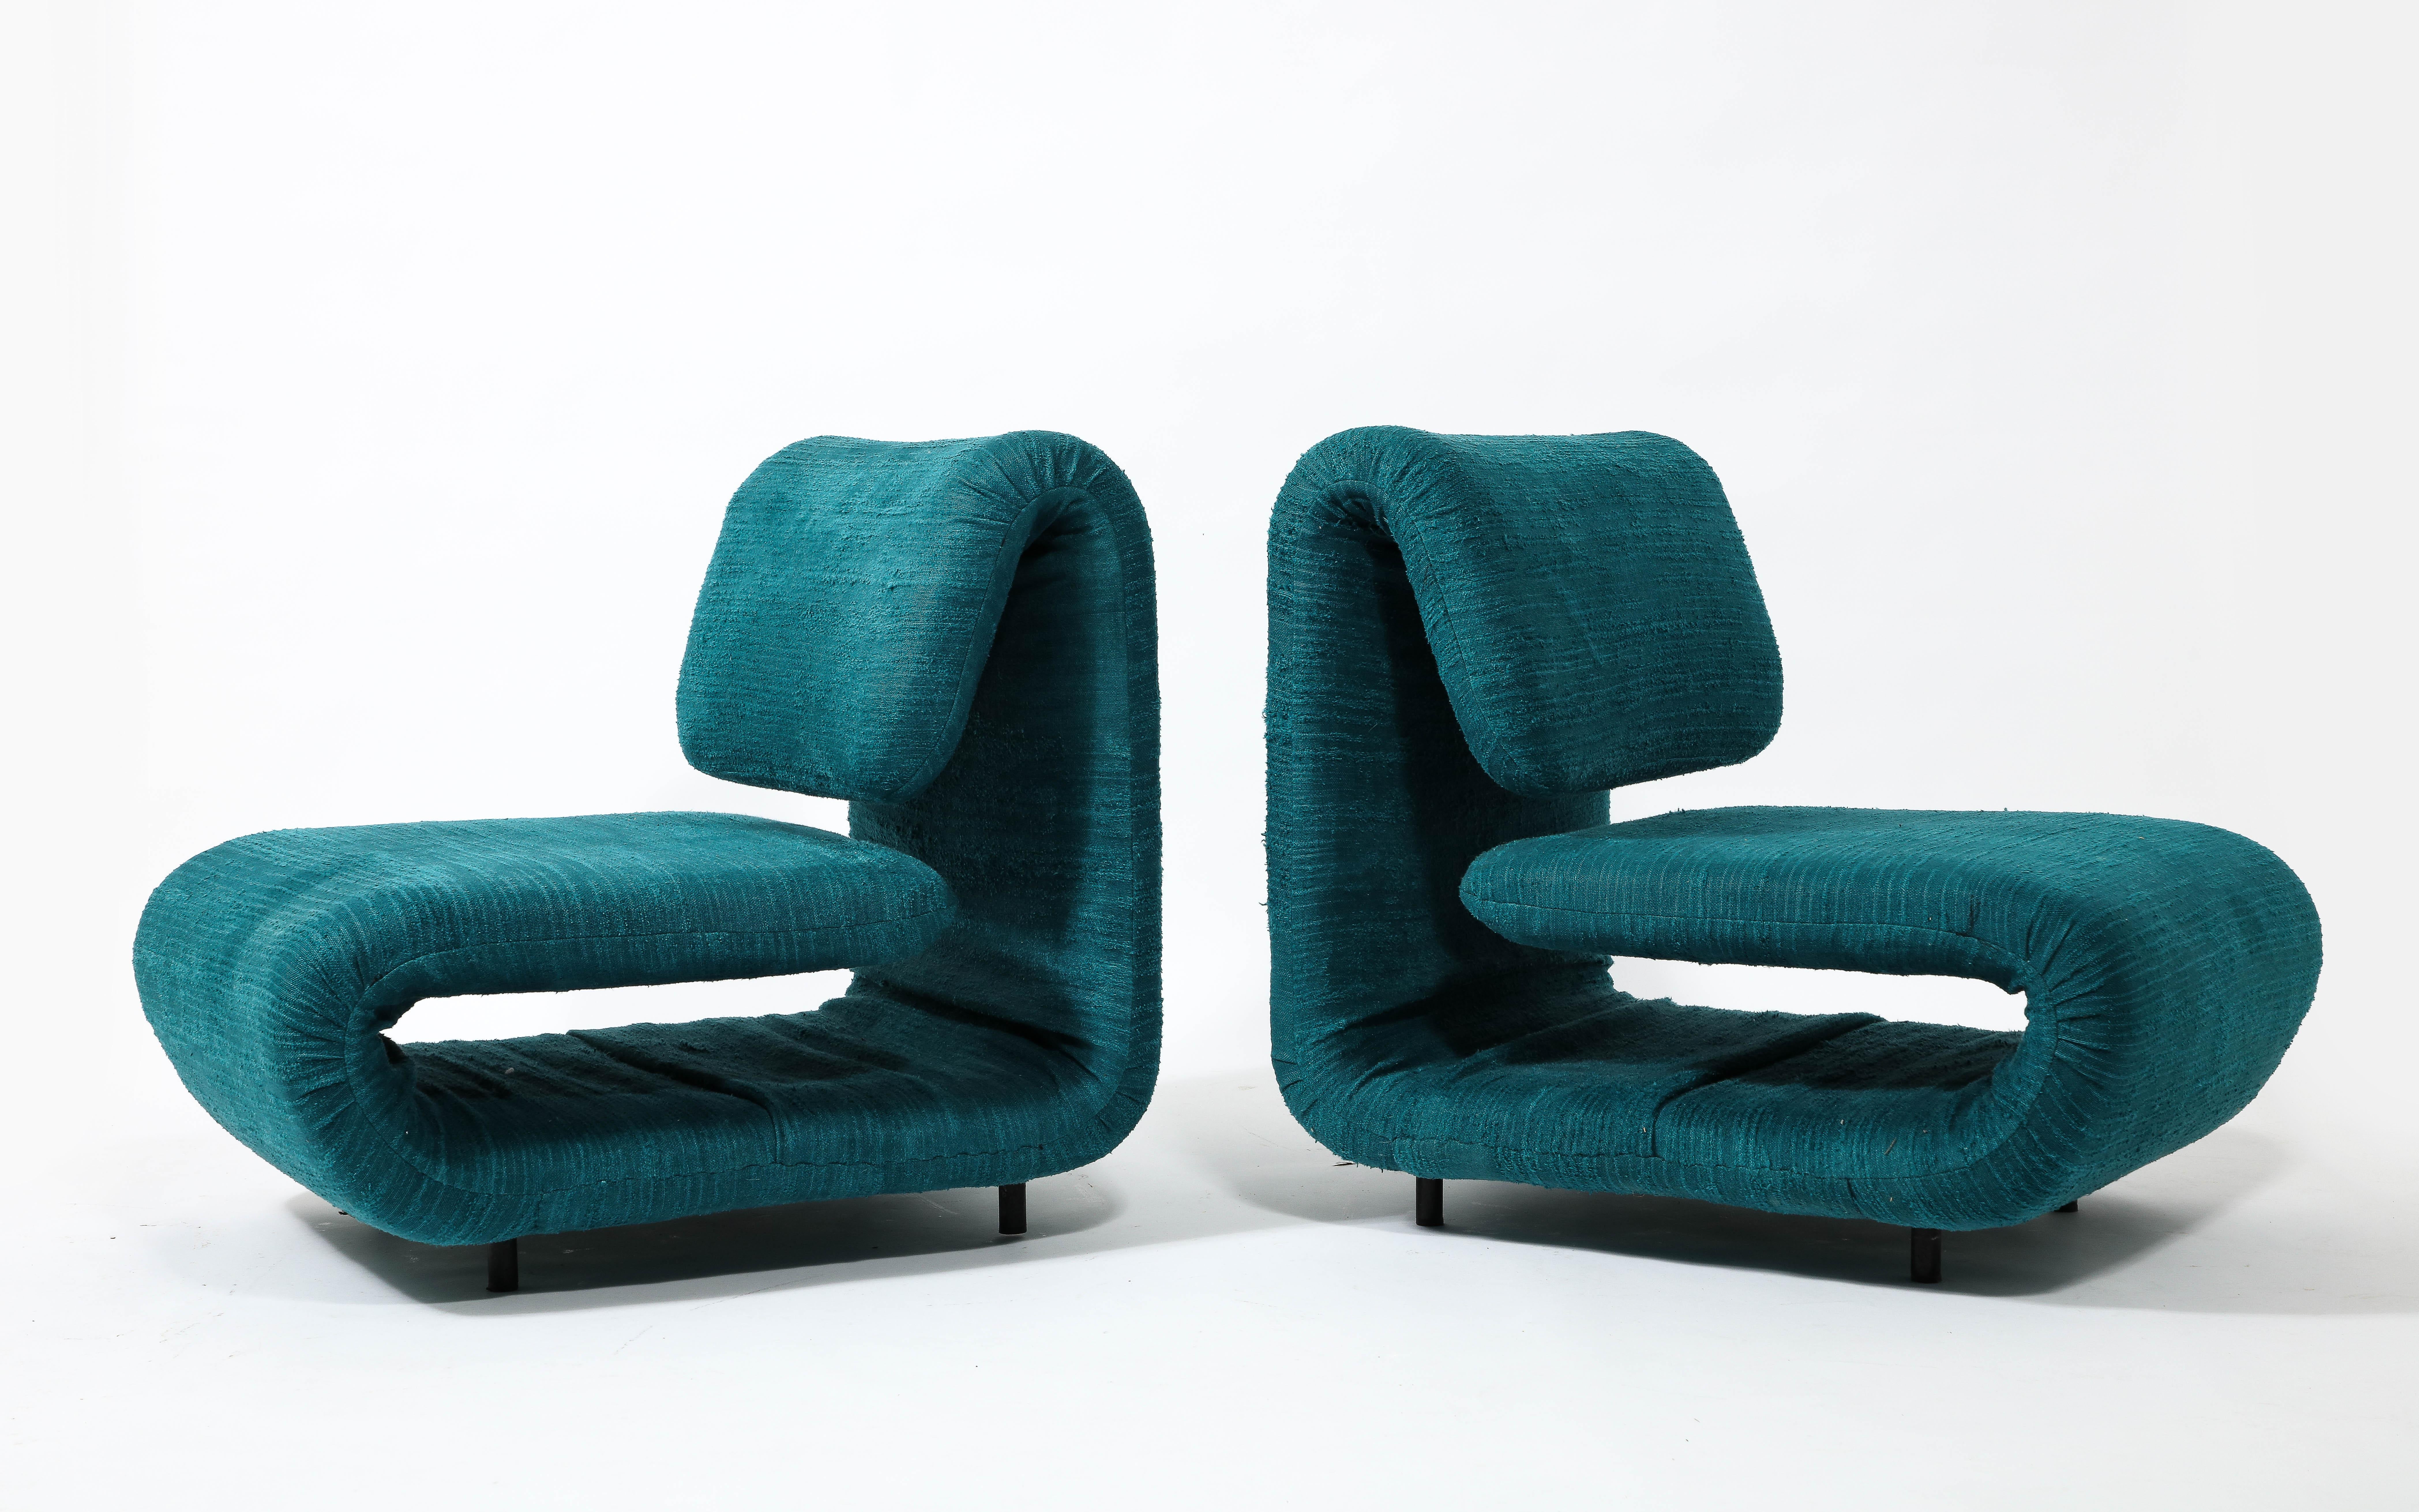 French Etienne-Henri Martin Pair of 1500 Slipper Lounge Chairs in Teal, France 1960's For Sale